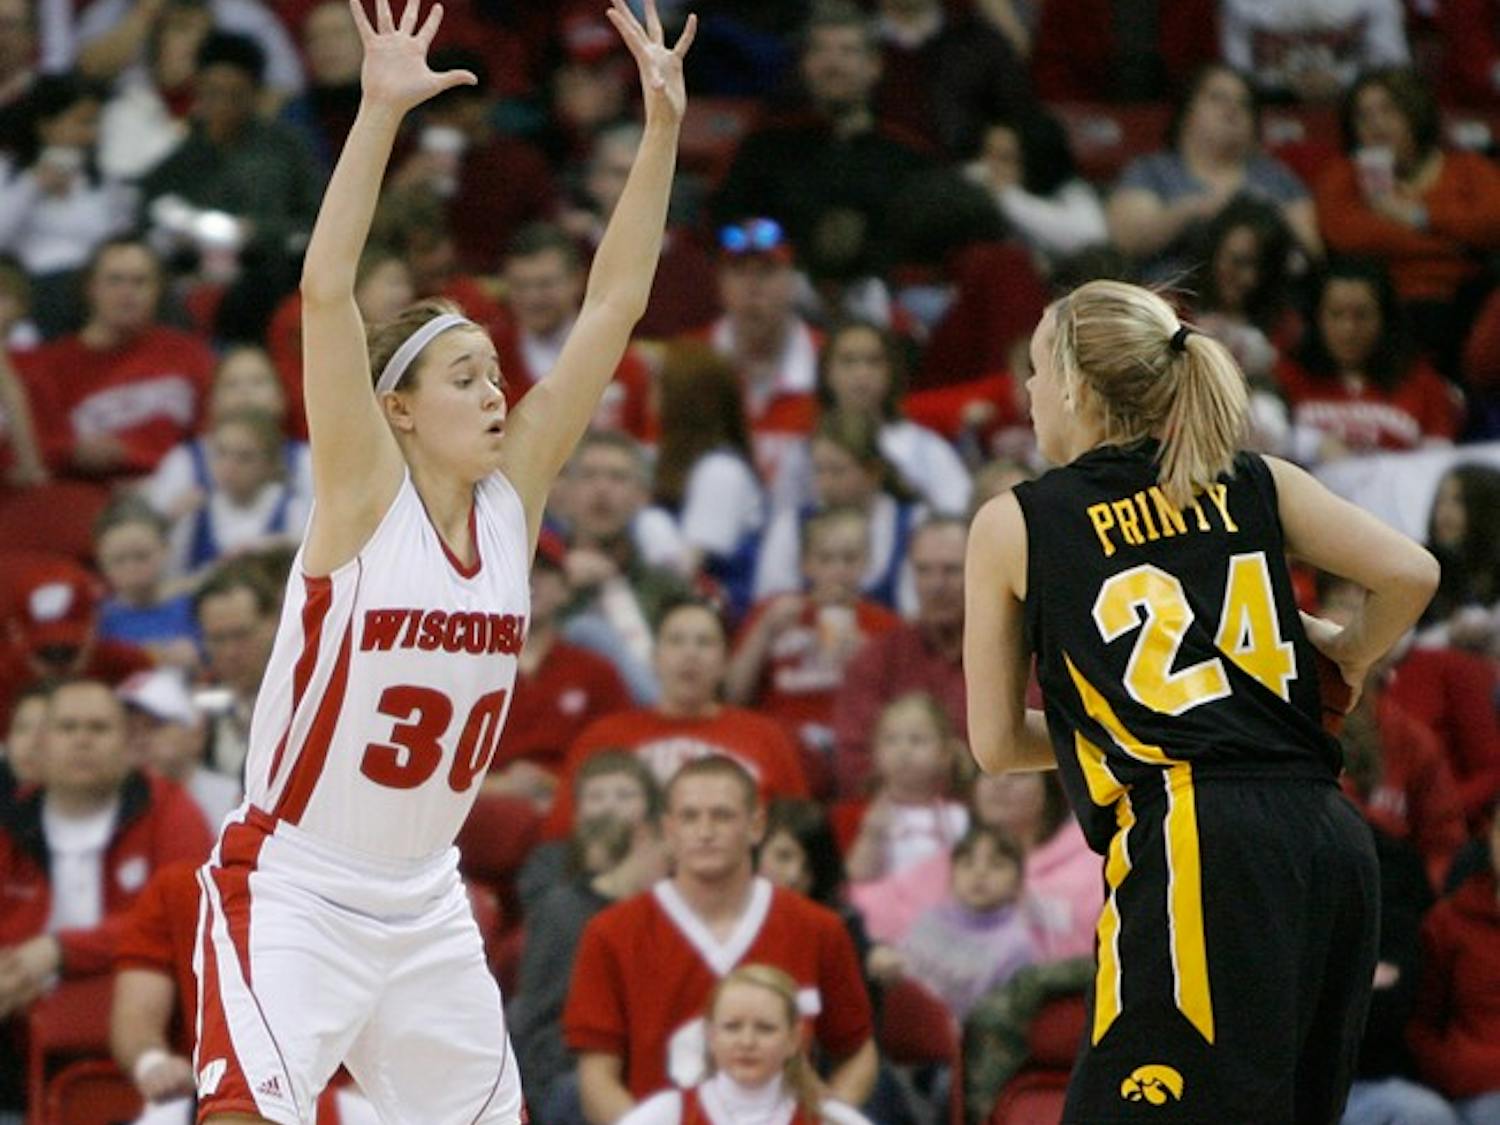 Five Badgers to watch in the 2010-'11 seasons